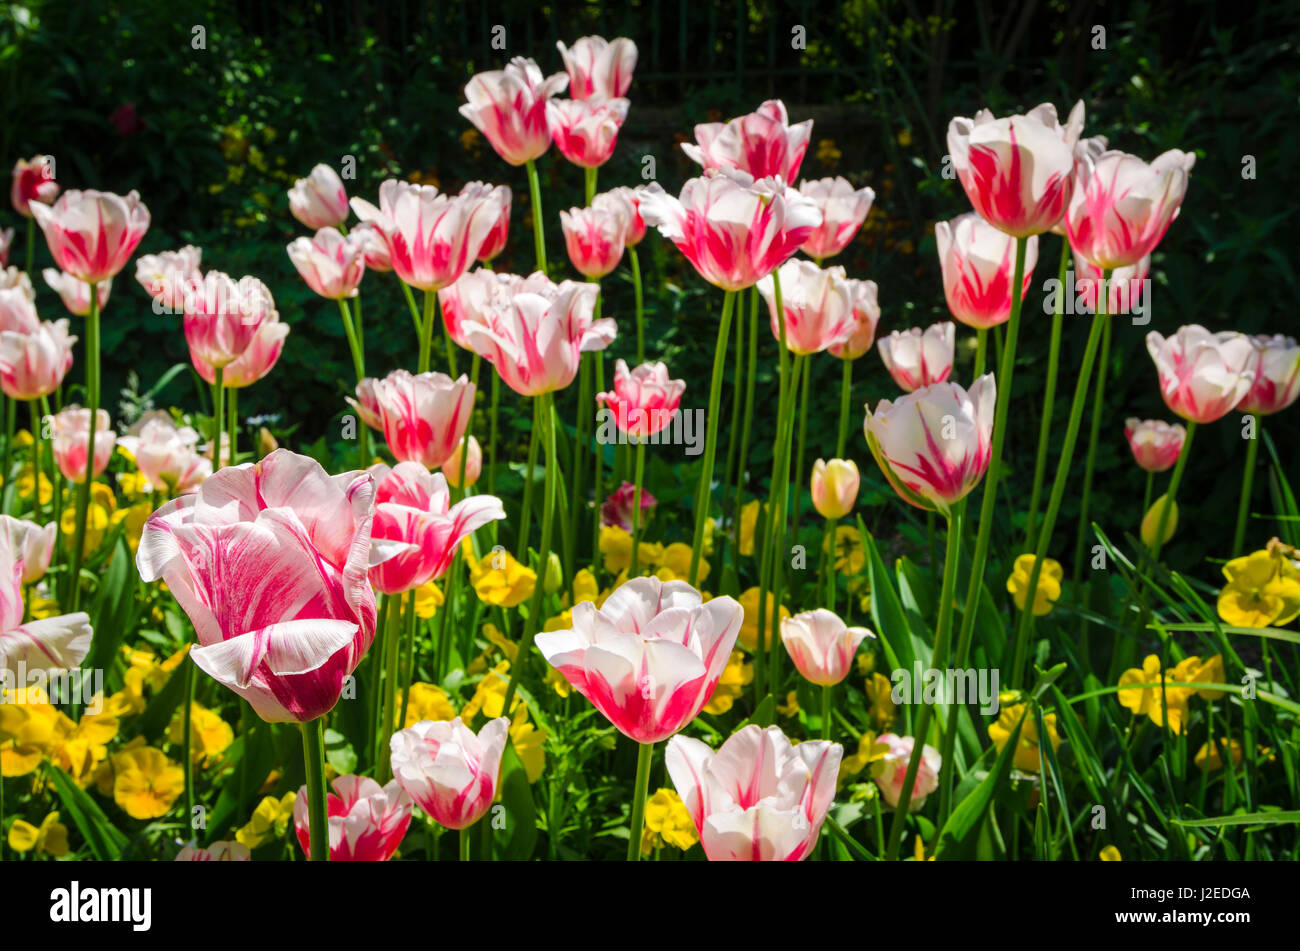 Tulips at Claude Monet house and gardens, Giverny, France Stock Photo